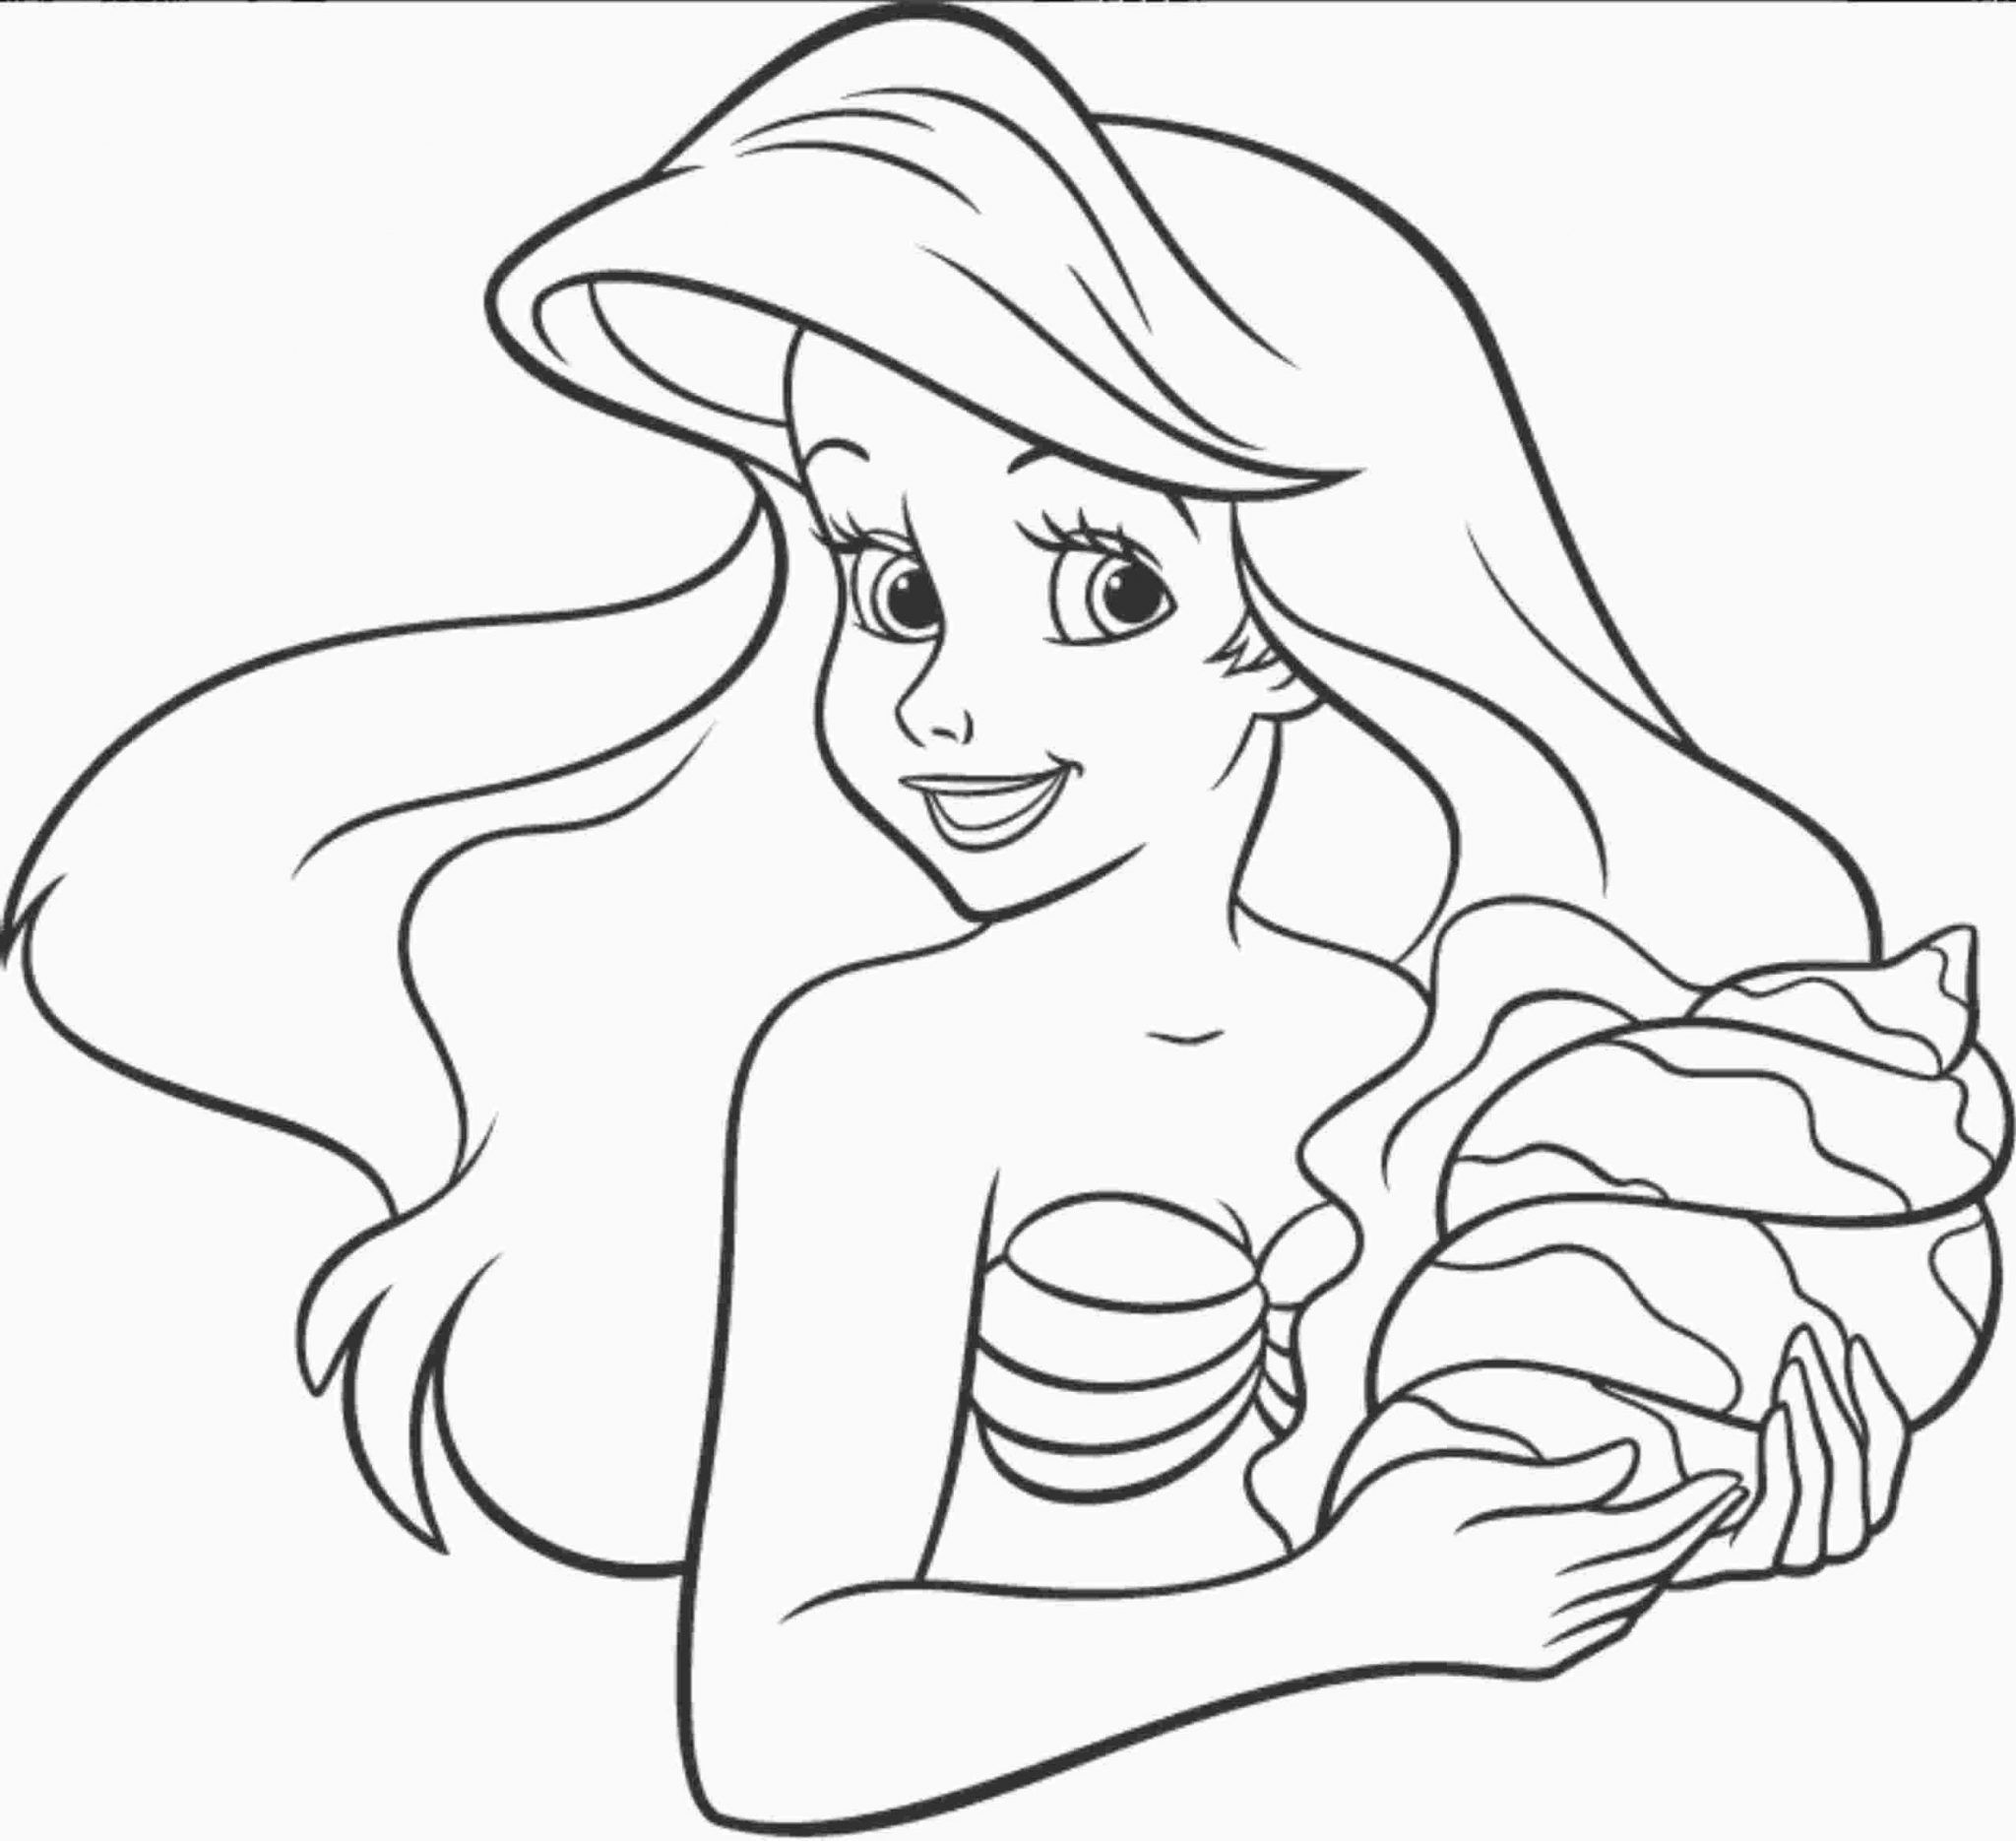 ariel little mermaid coloring pages ariel the little mermaid coloring pages the little coloring ariel mermaid little pages 